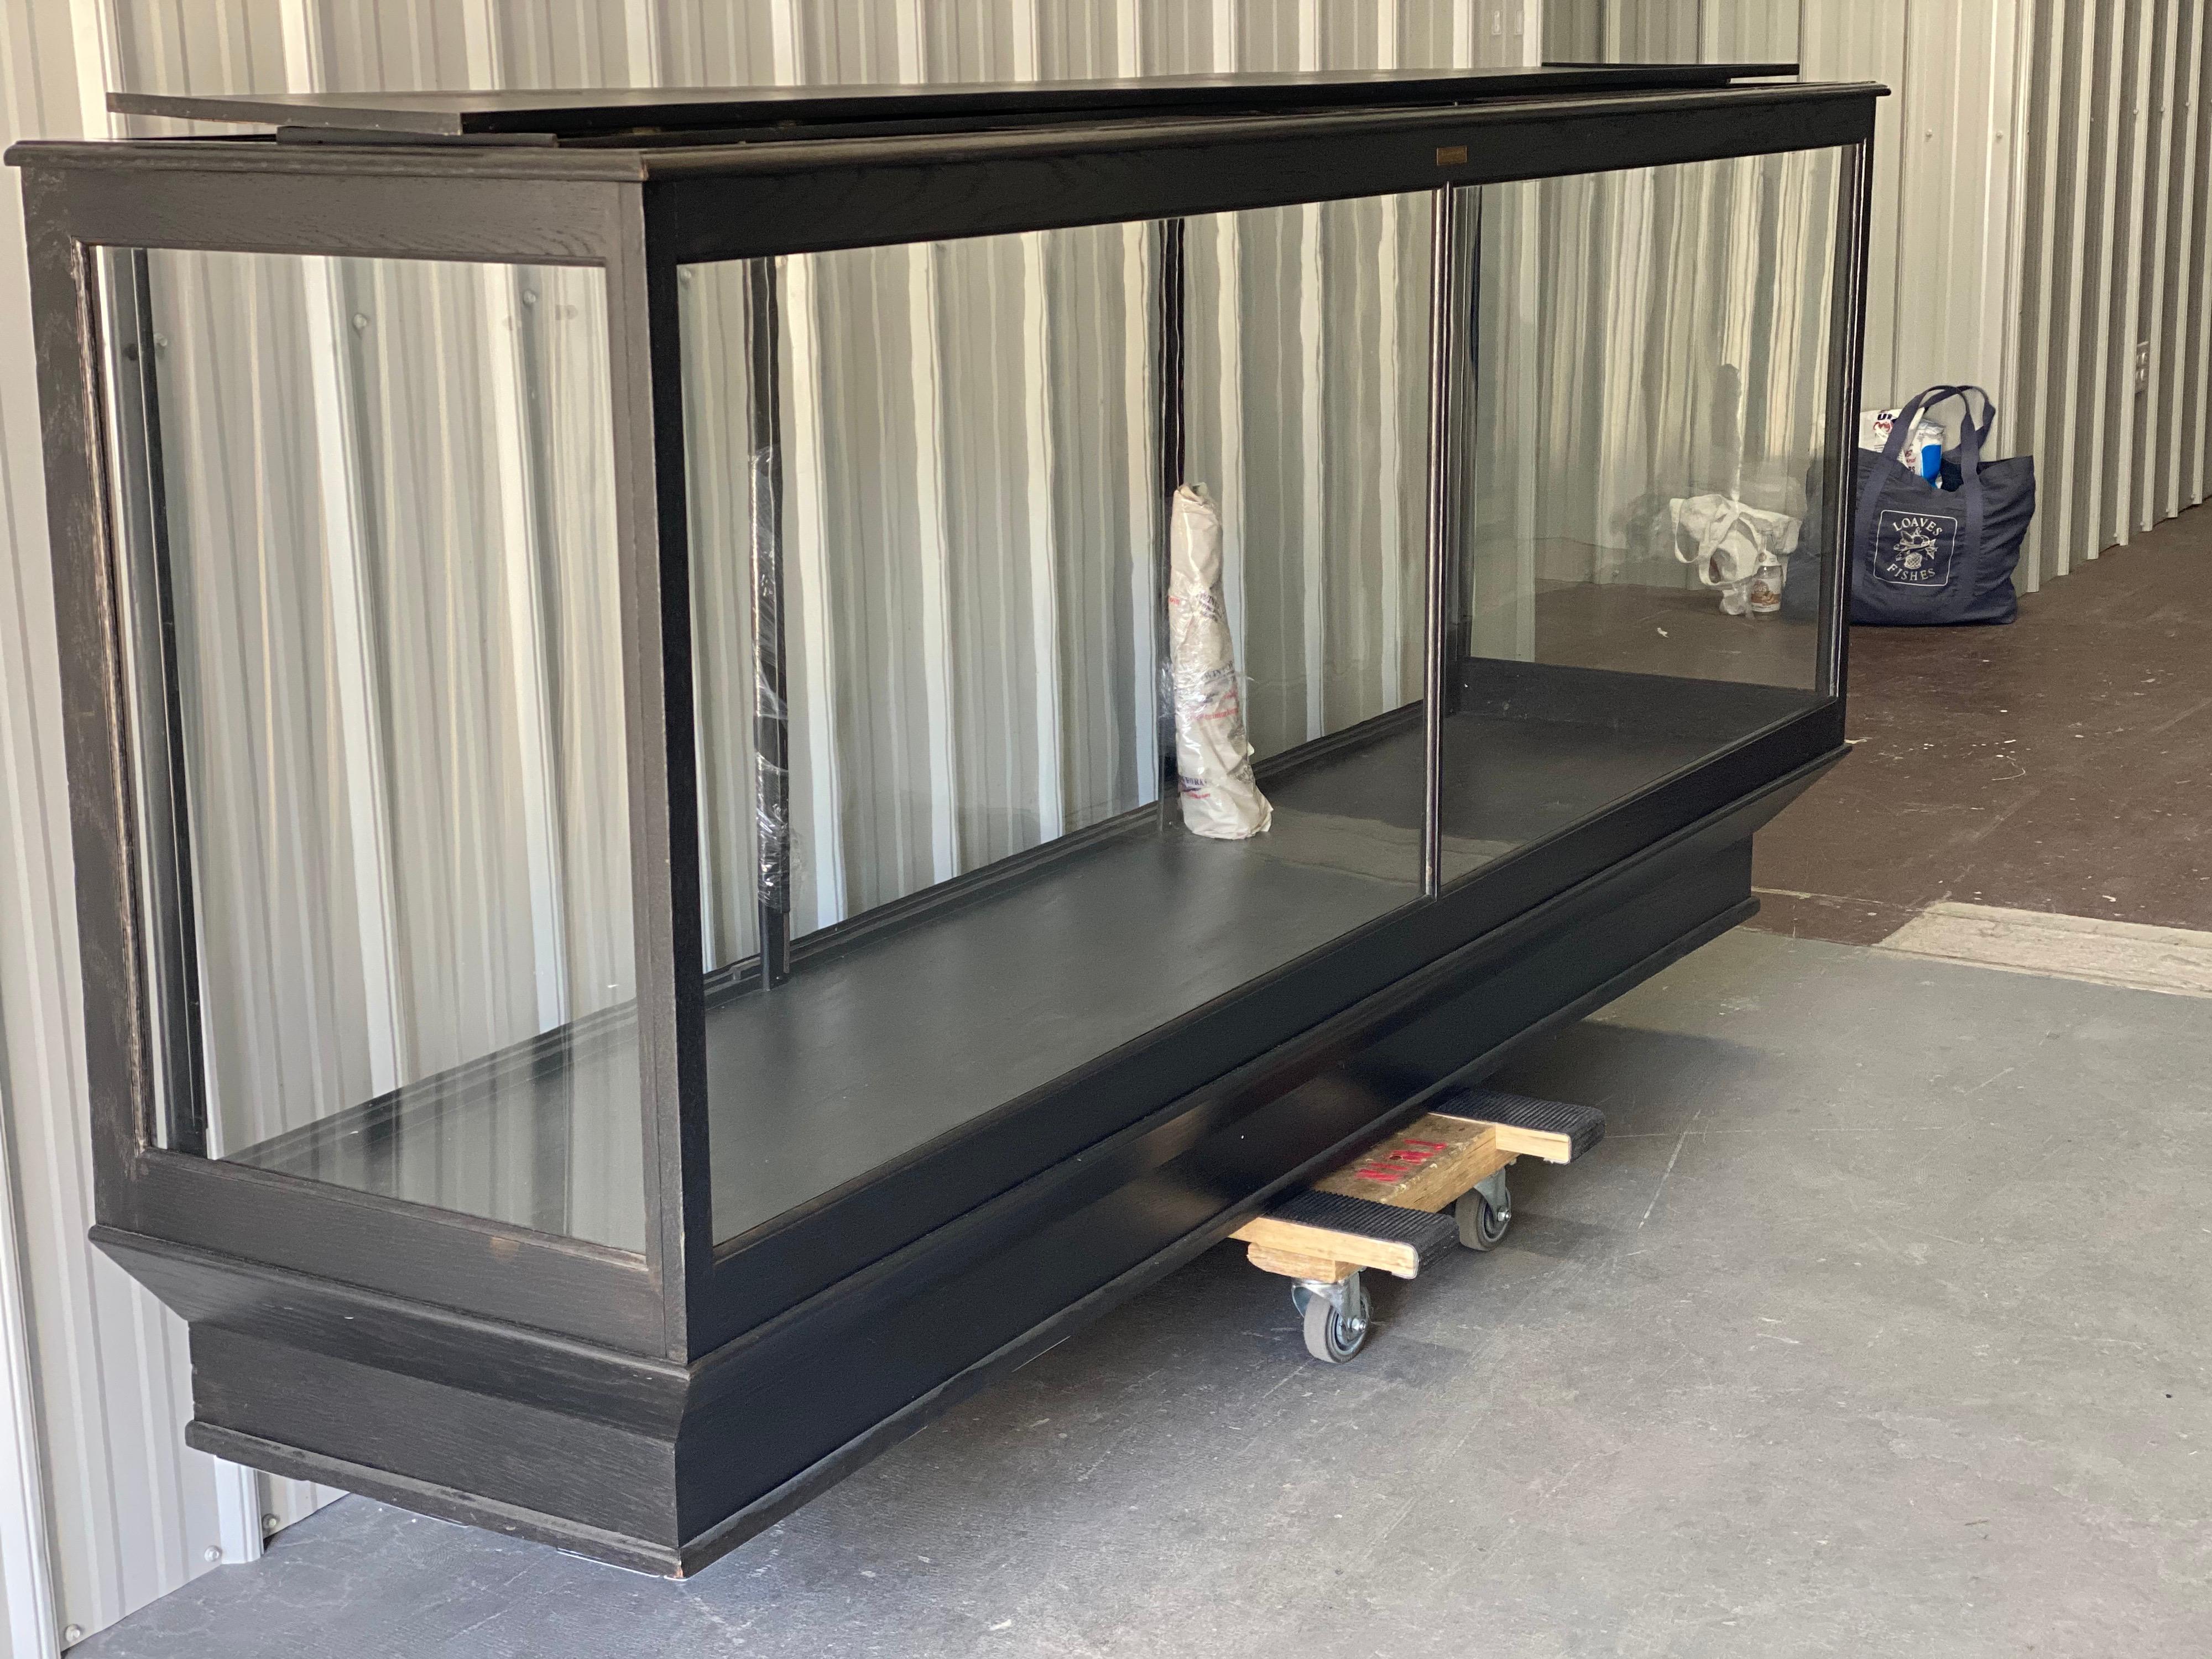 Vintage large scale black stained oak & glass shop display case/cabinet by Columbus Showcases
This is a fantastic display with plenty of display shelving and perfect height for viewing. The frame is crafted in oak and more recently refinished in a